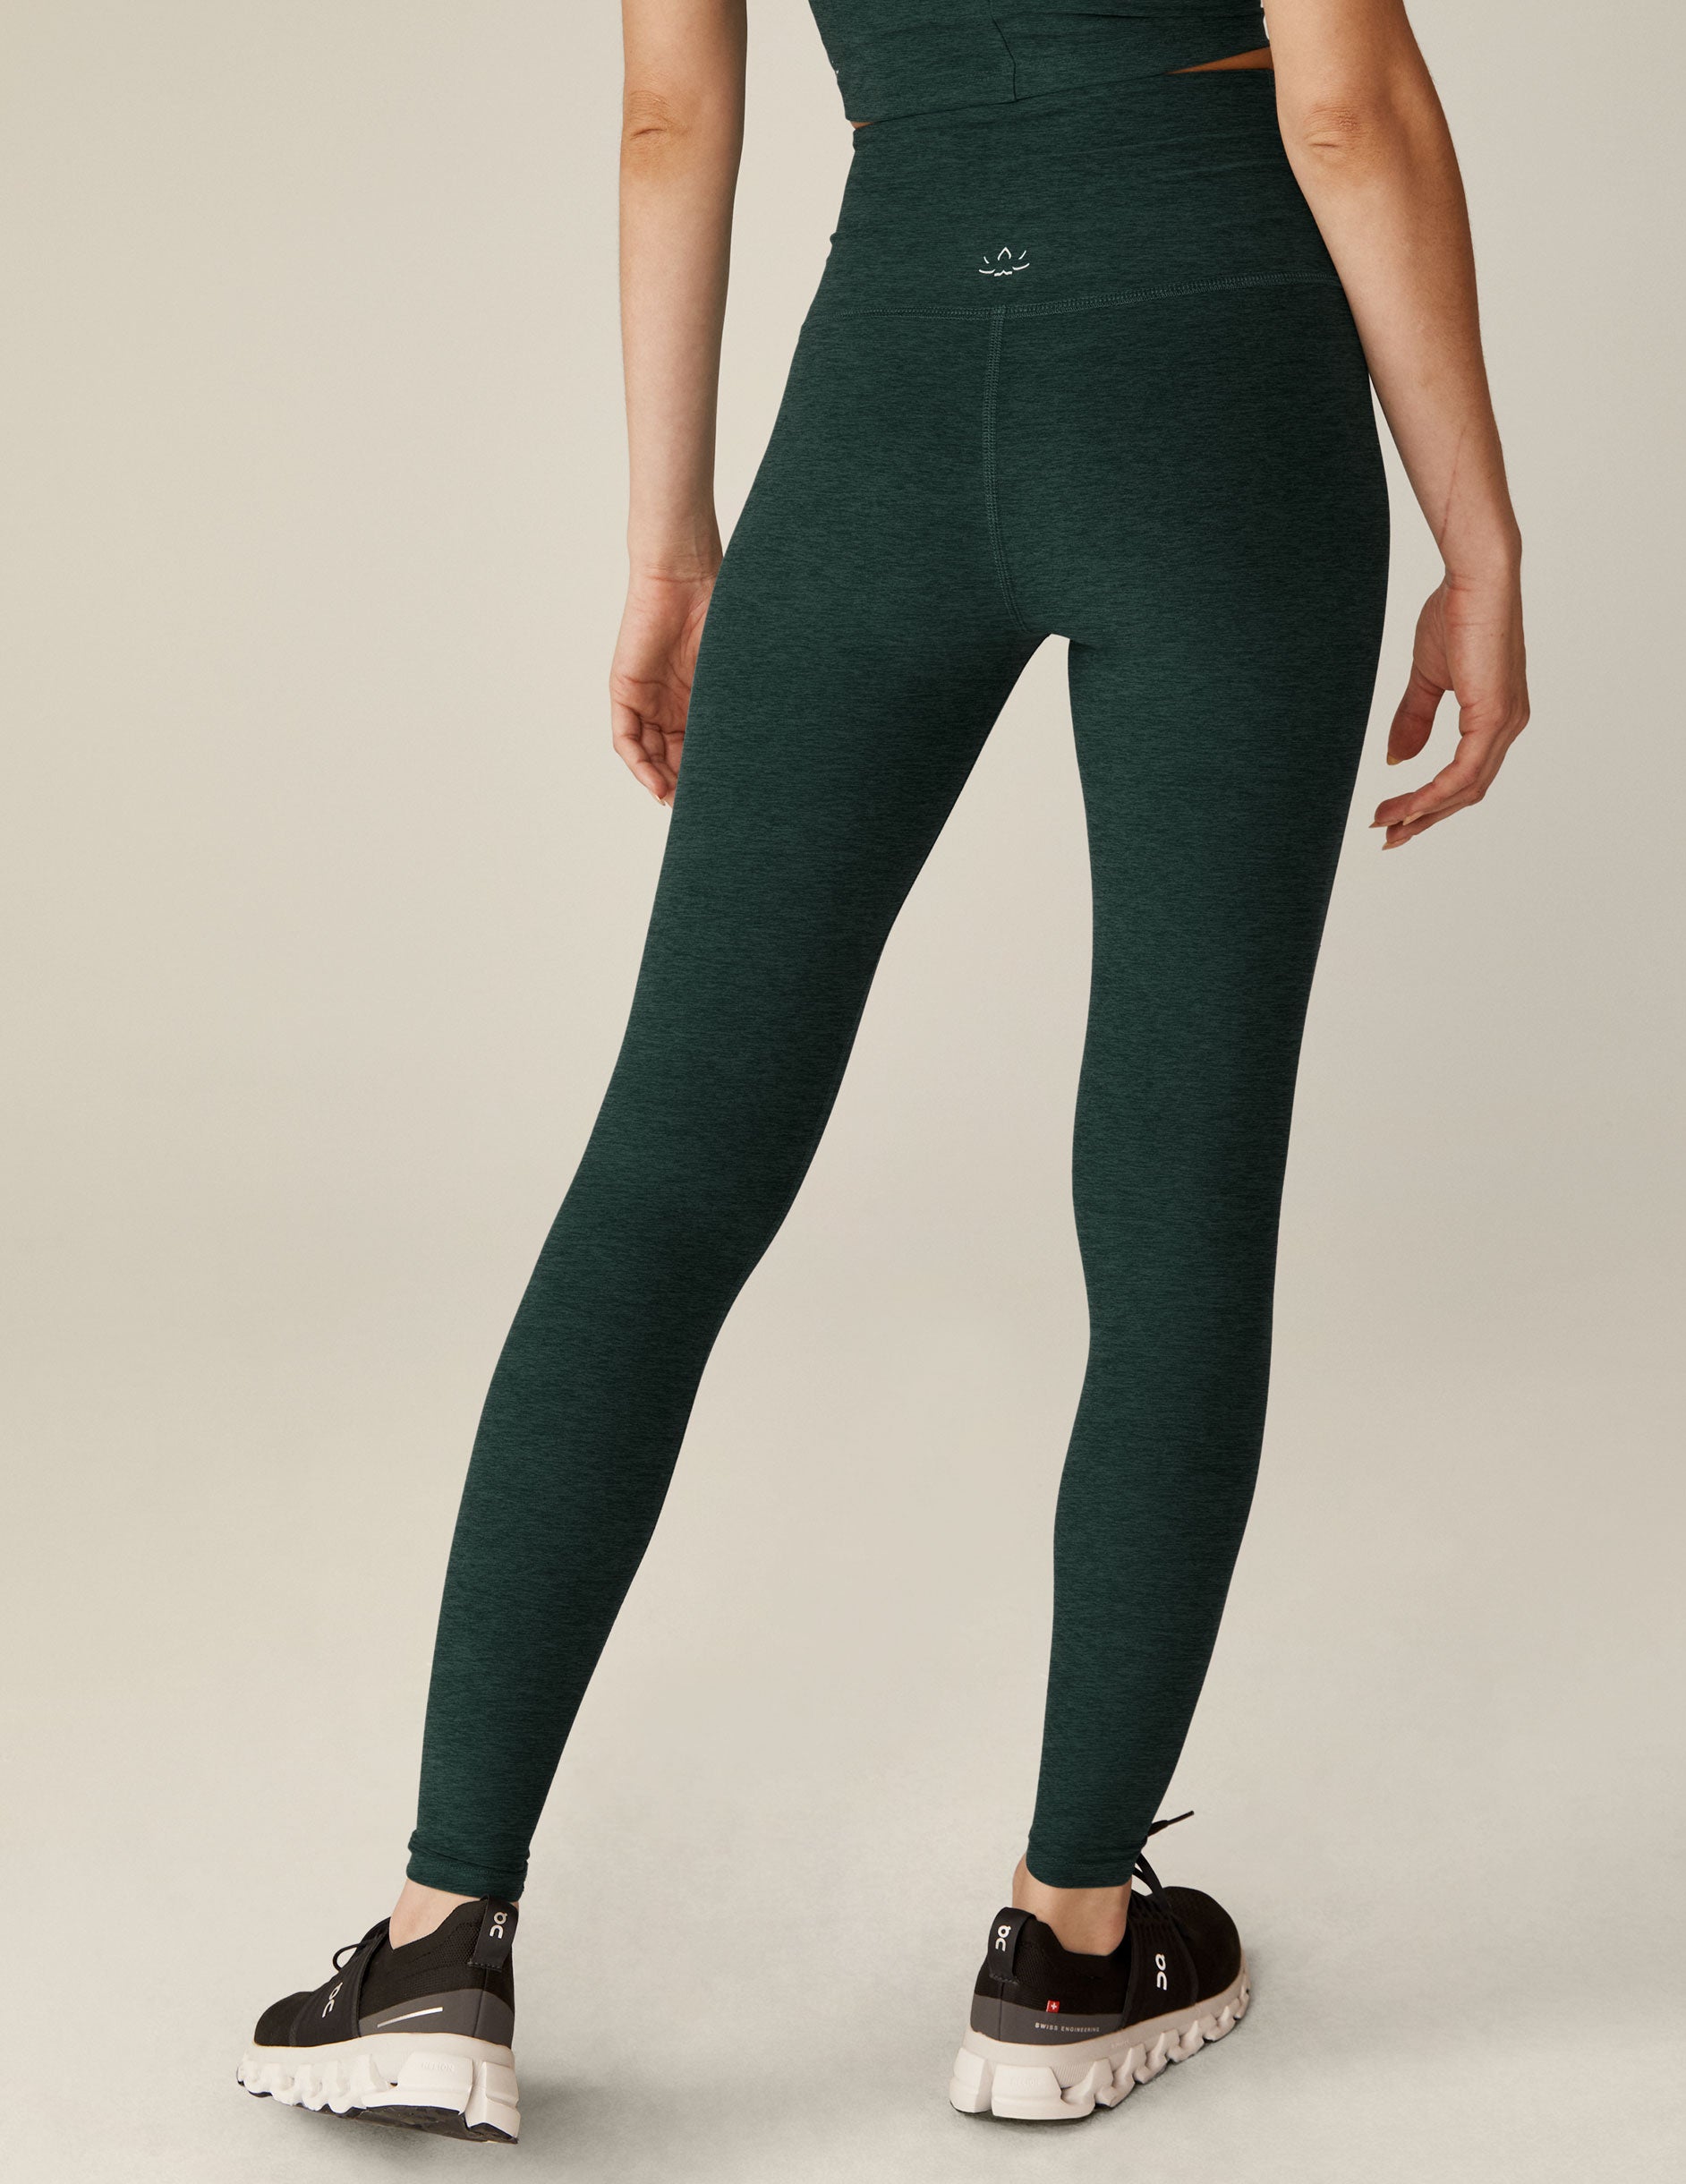 Zyia Active Leggings Green Size 6 - $21 - From Brynne